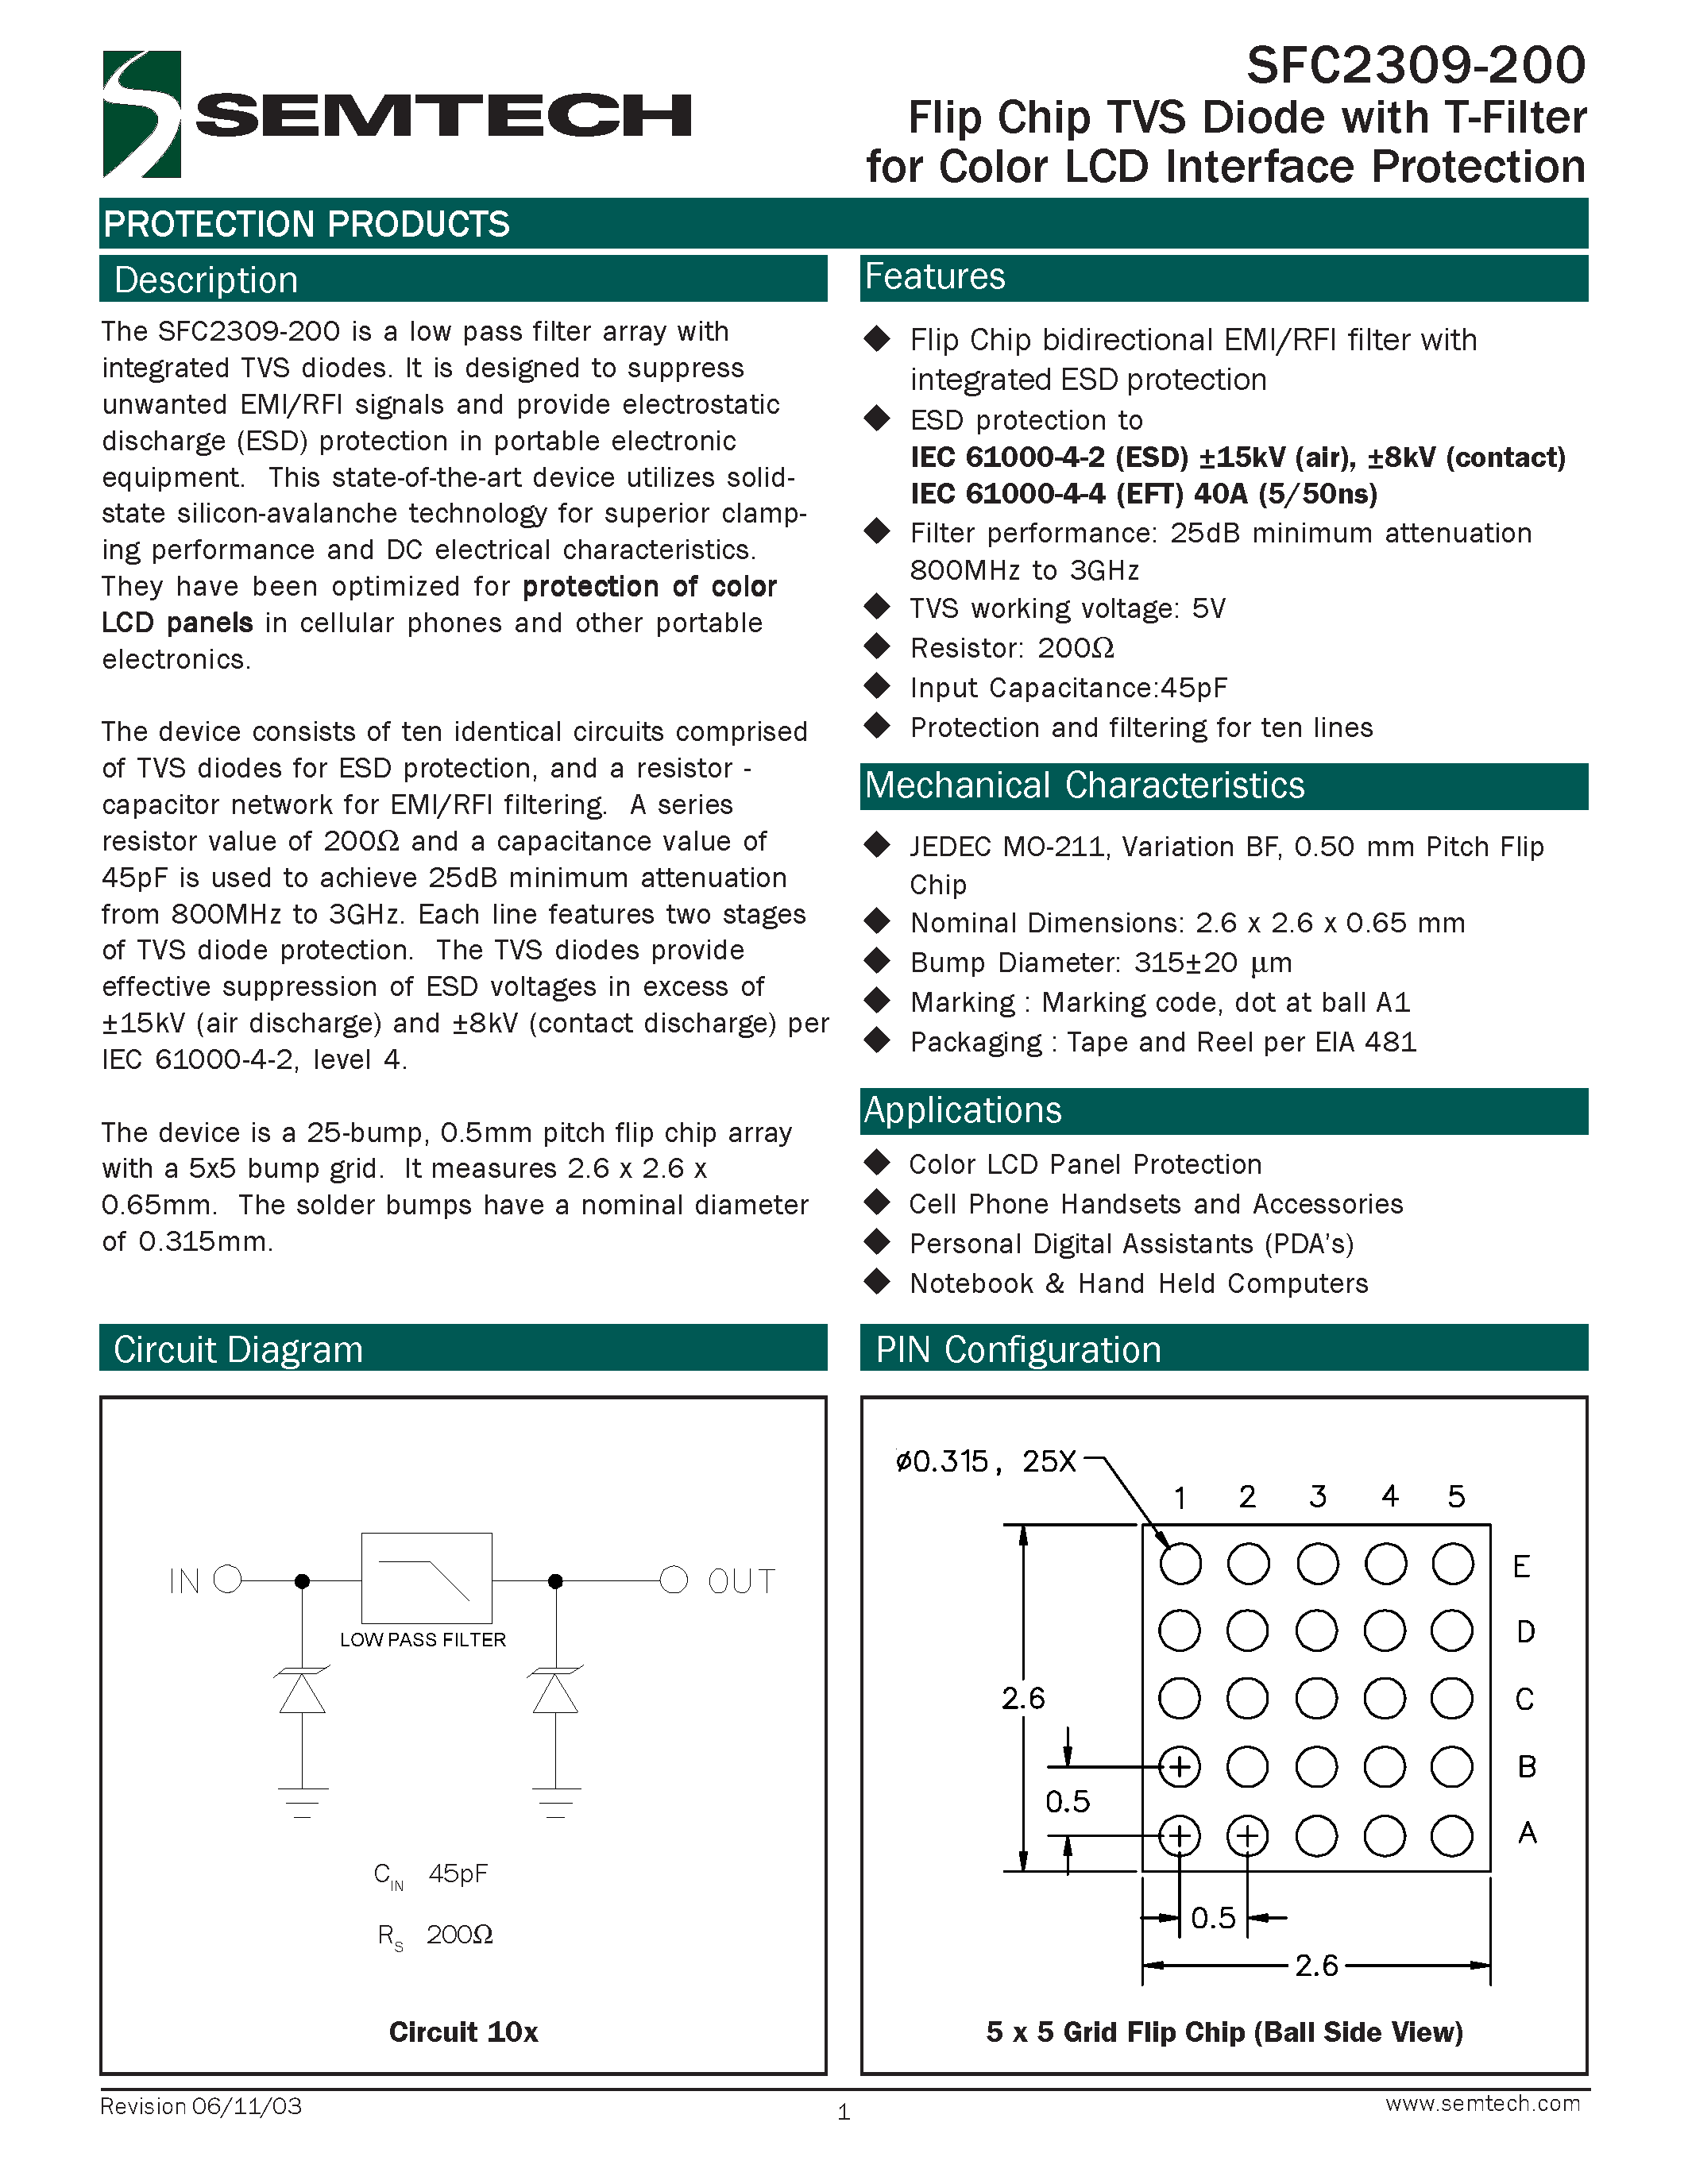 Datasheet SFC2309-200 - Flip Chip TVS Diode with T-Filter for Color LCD Interface Protection page 1